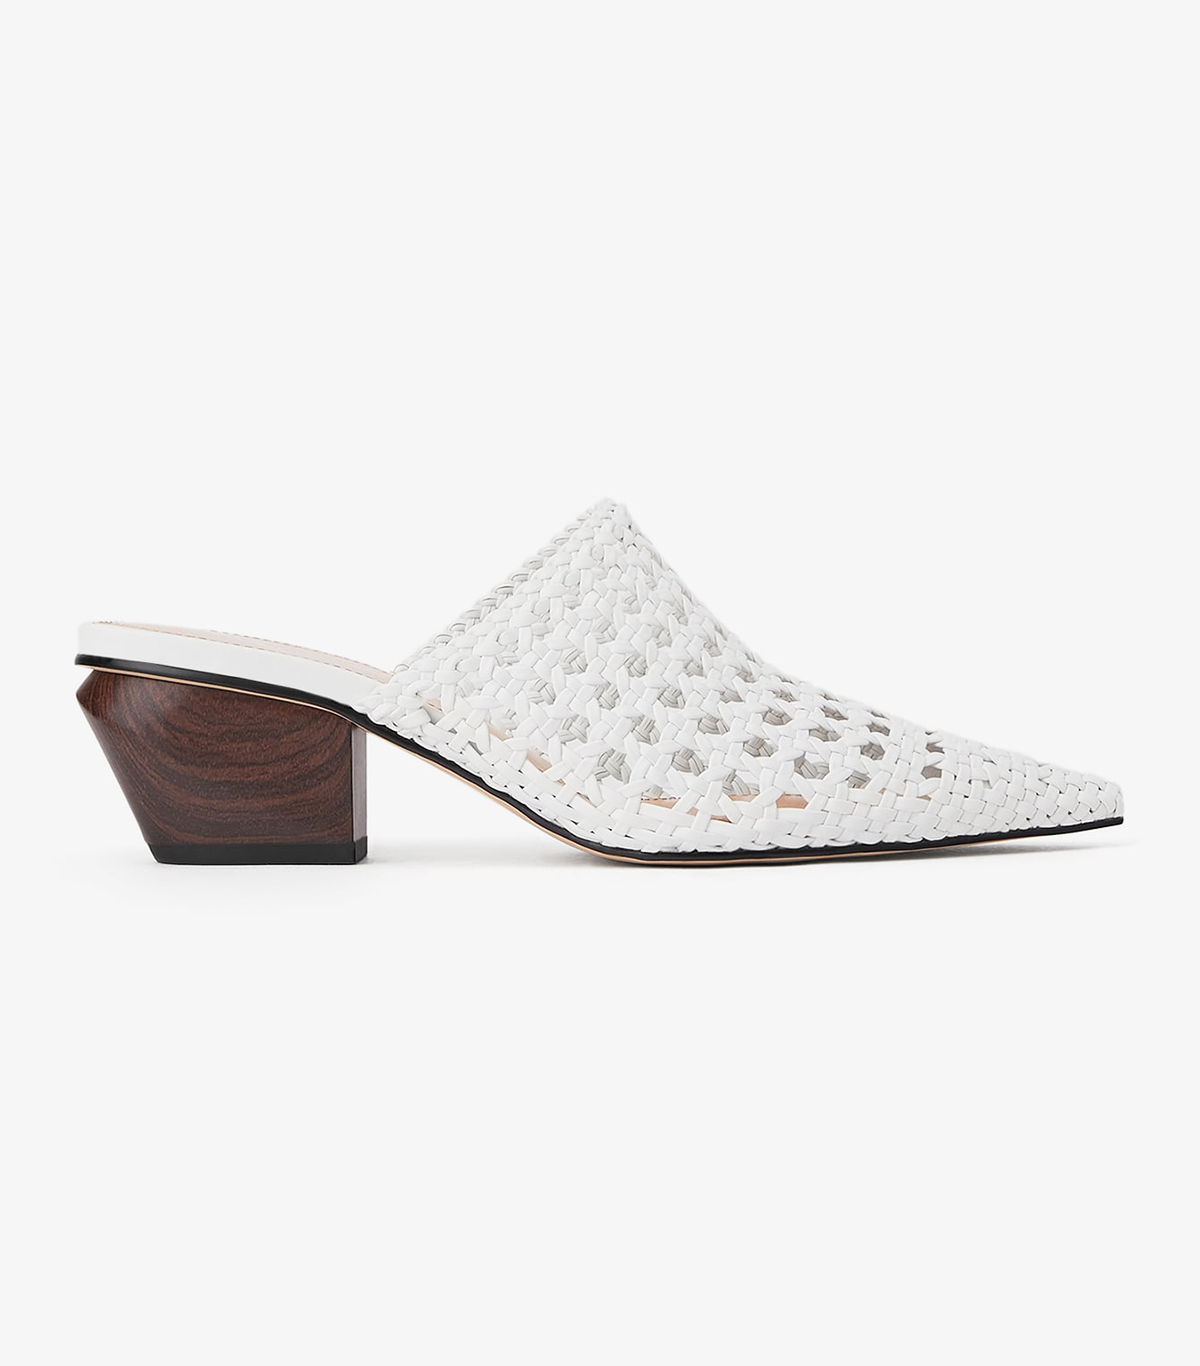 Shop Zara's Most Expensive-Looking Spring Shoes | Who What Wear